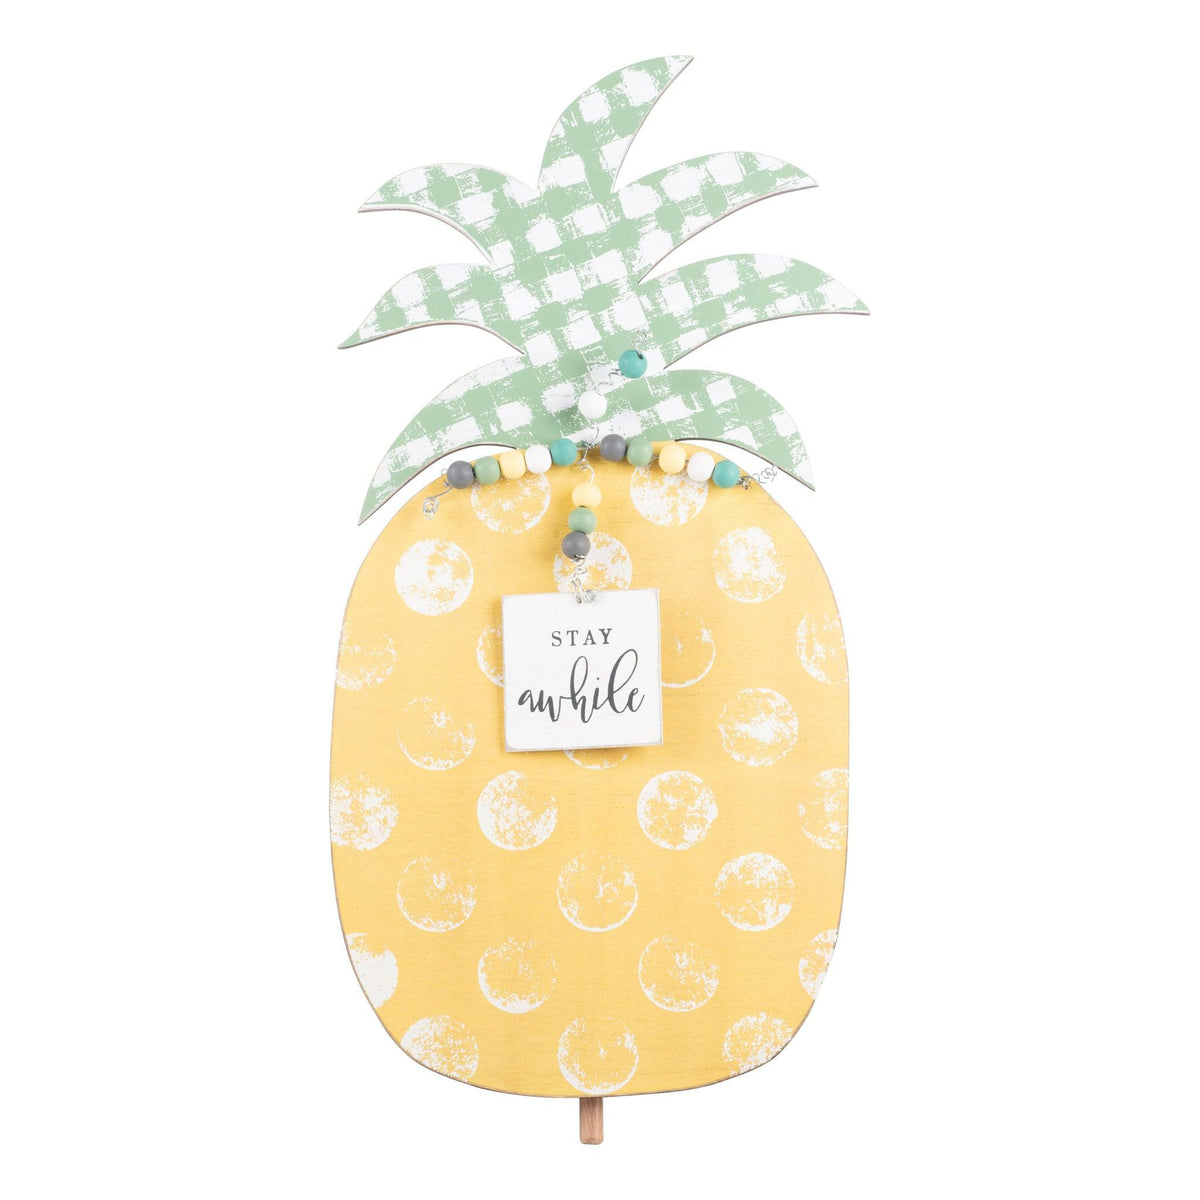 Stay Awhile Pineapple Topper - GLORY HAUS 